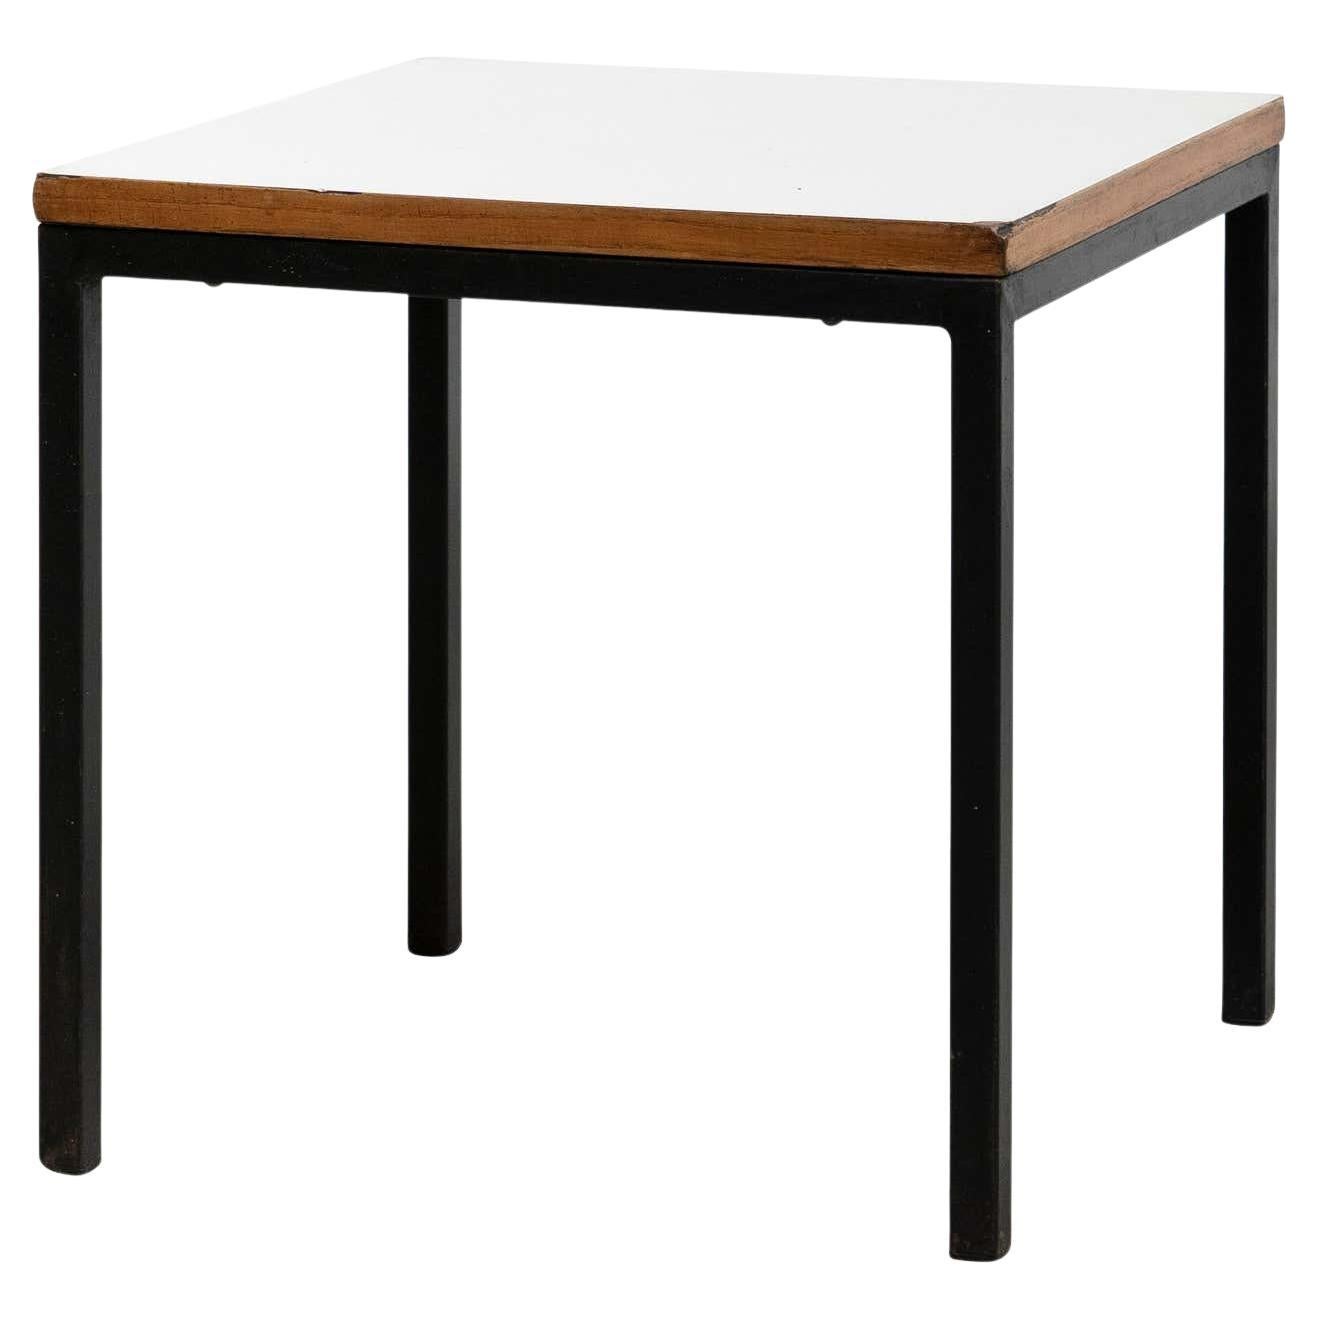 Charlotte Perriand Metal, Wood and Formica Table for Cansado, circa 1950